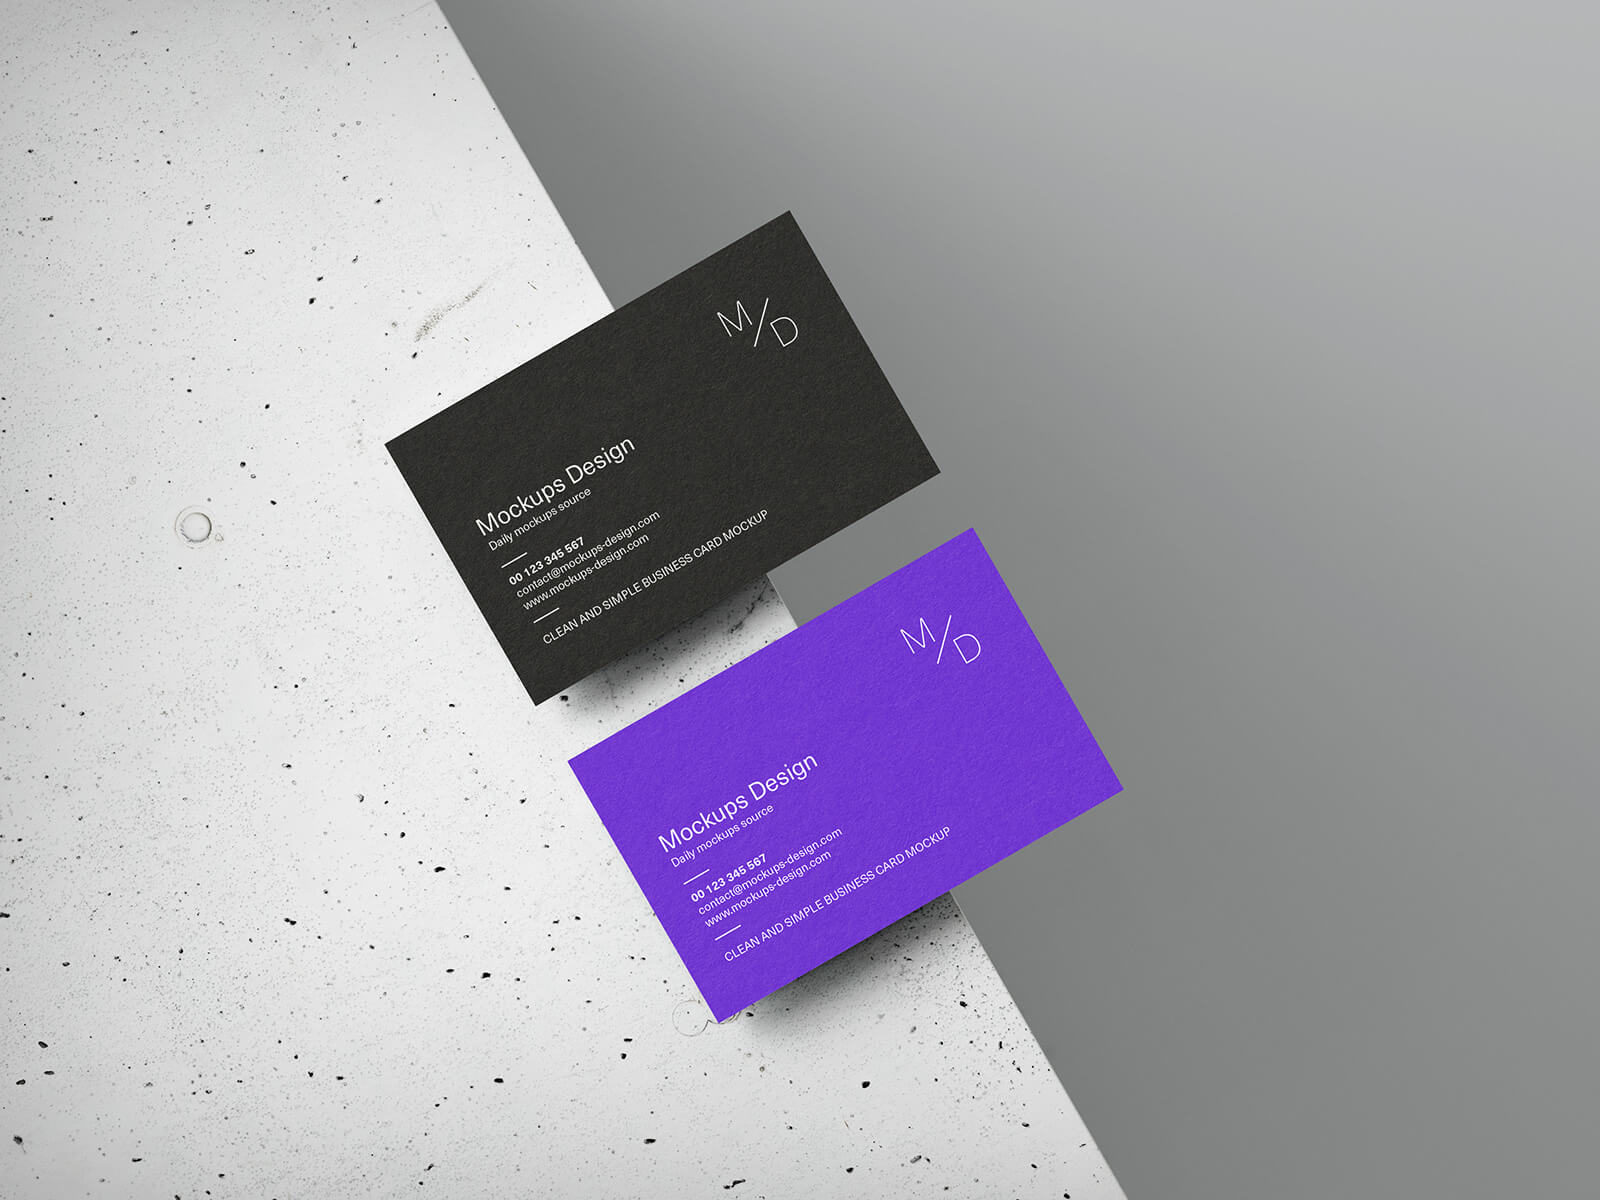 5 Free Concrete Cube Business Card Mockup PSD Files